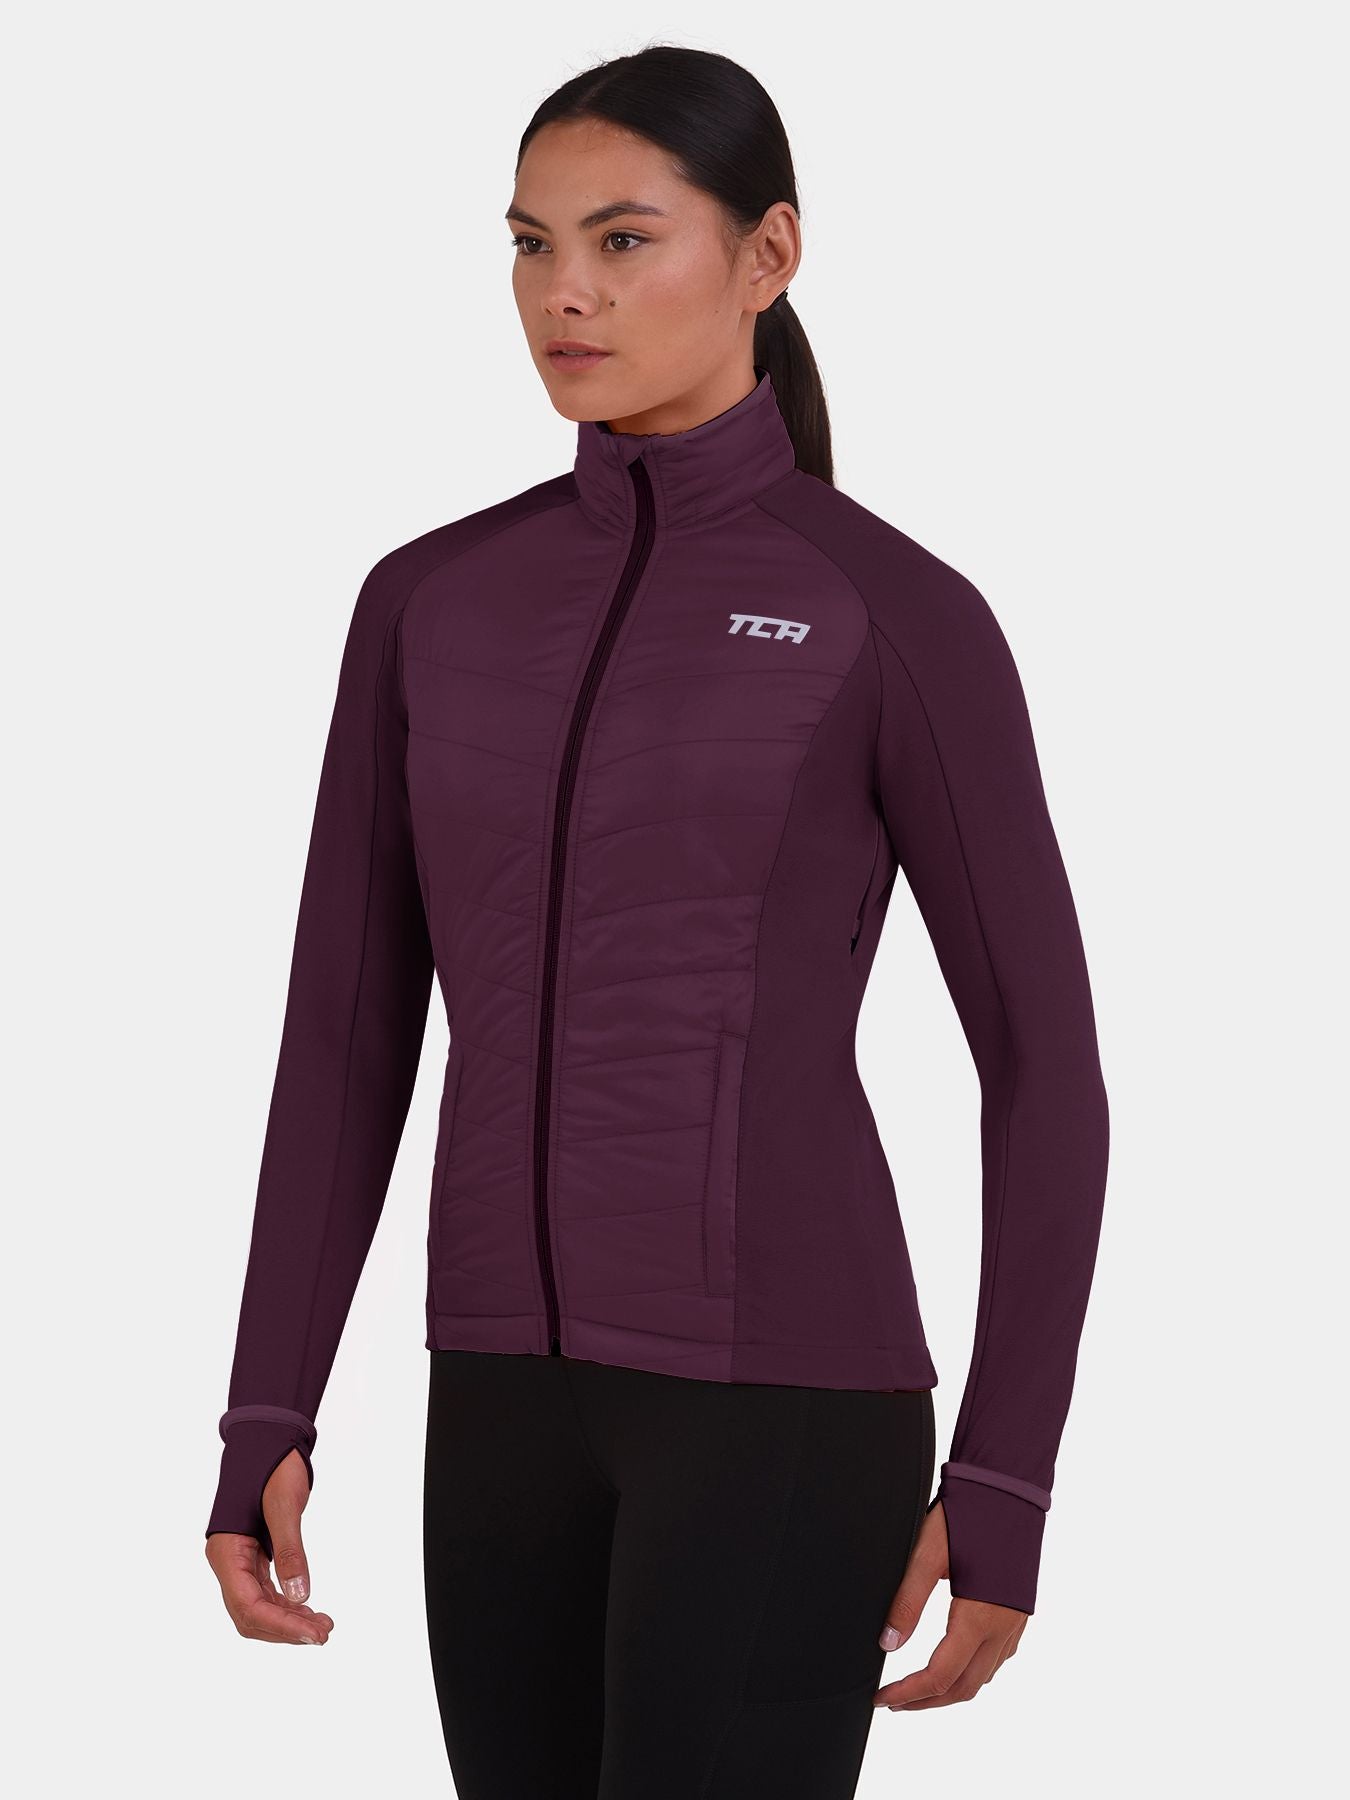 Excel Running Padded Packable Hooded Jacket For Women With Thumbholes, Underarm Ventilation Zips, Zip Pockets & Reflective Strips